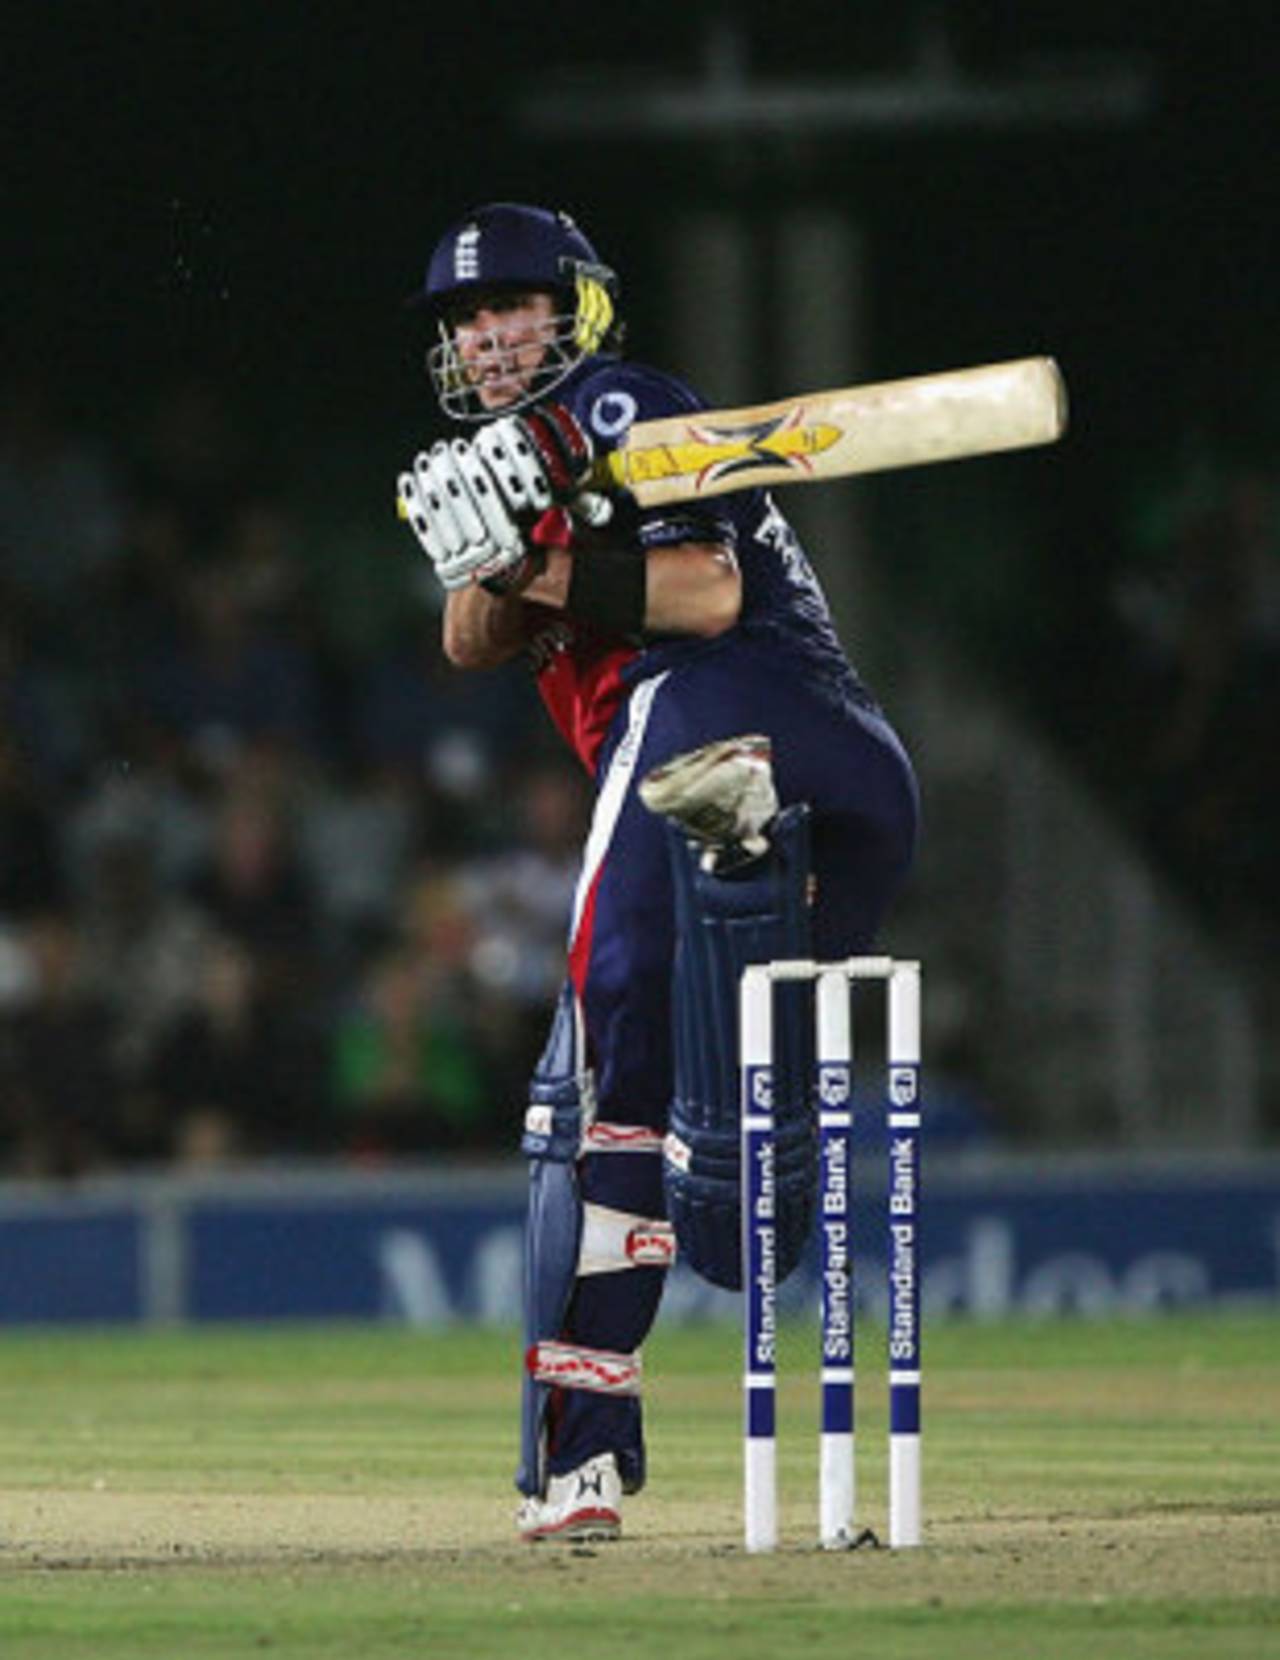 Kevin Pietersen on his way to a century, East London, England v South Africa, February 9, 2005